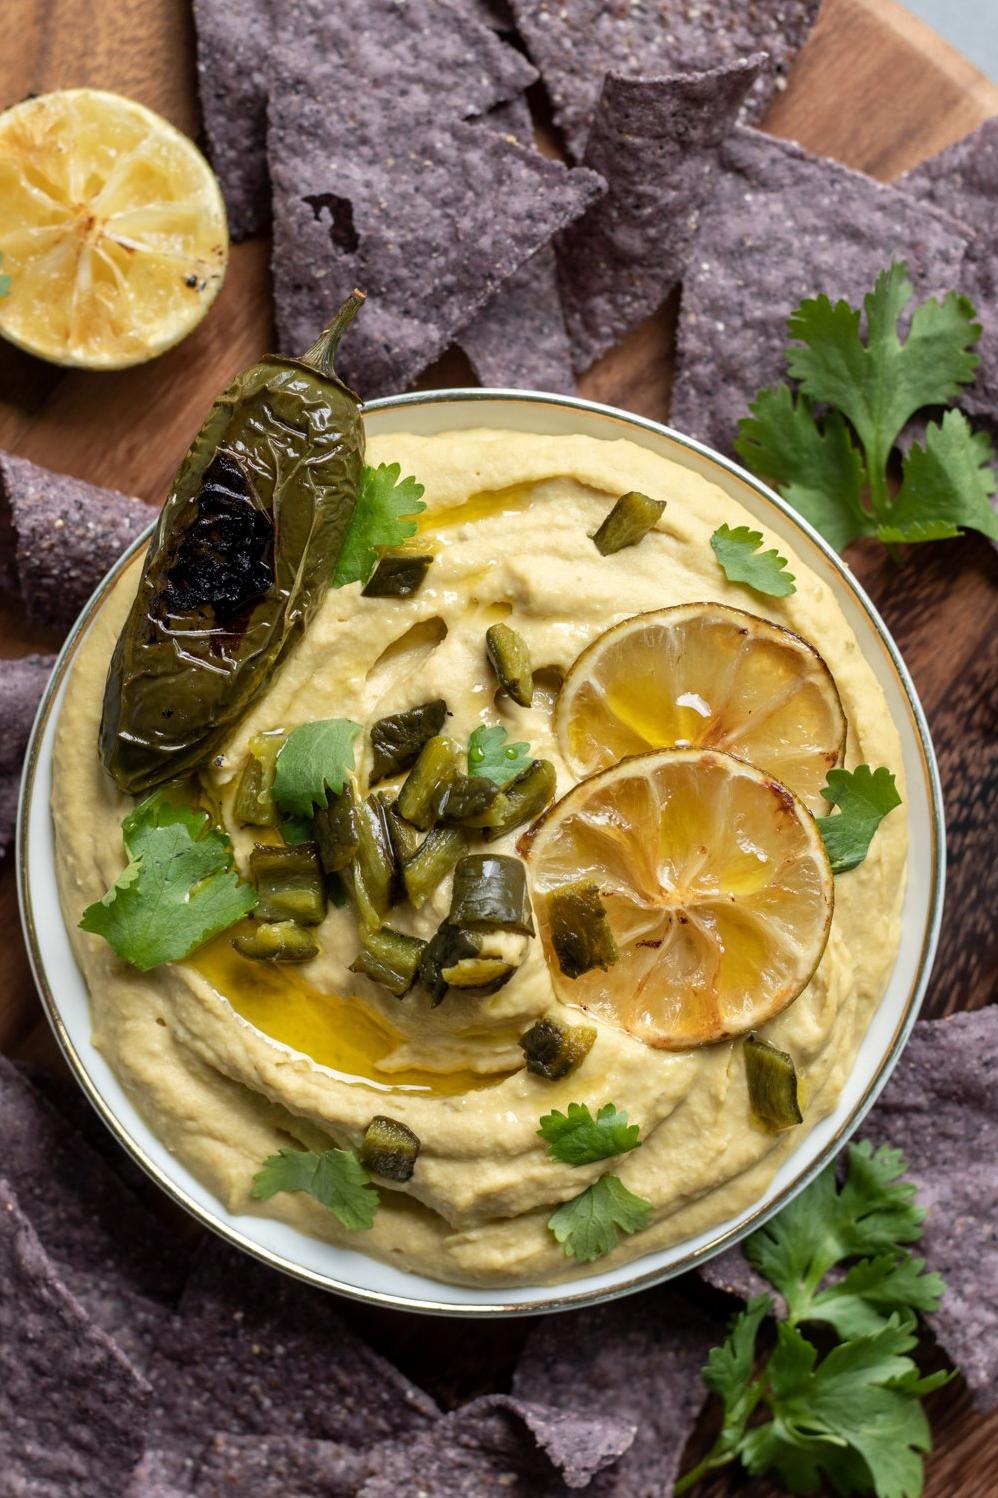  If you love hummus, you're in for a treat!